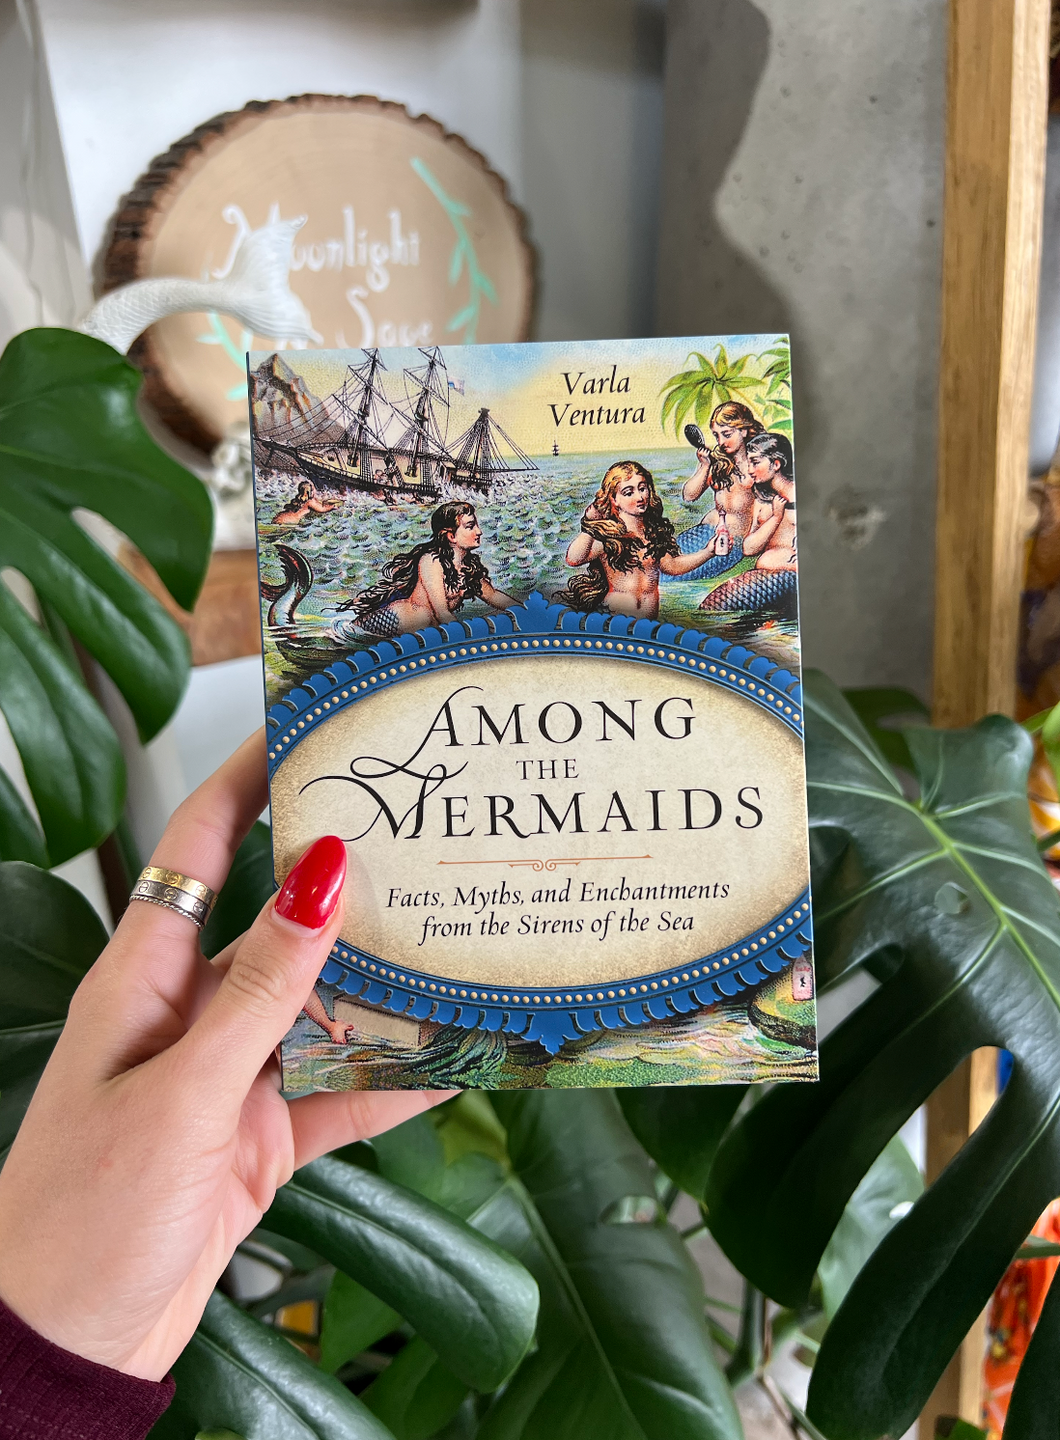 Among the Mermaids: Facts, Myths, and Enchantments from the Sirens of the Sea Paperback Book